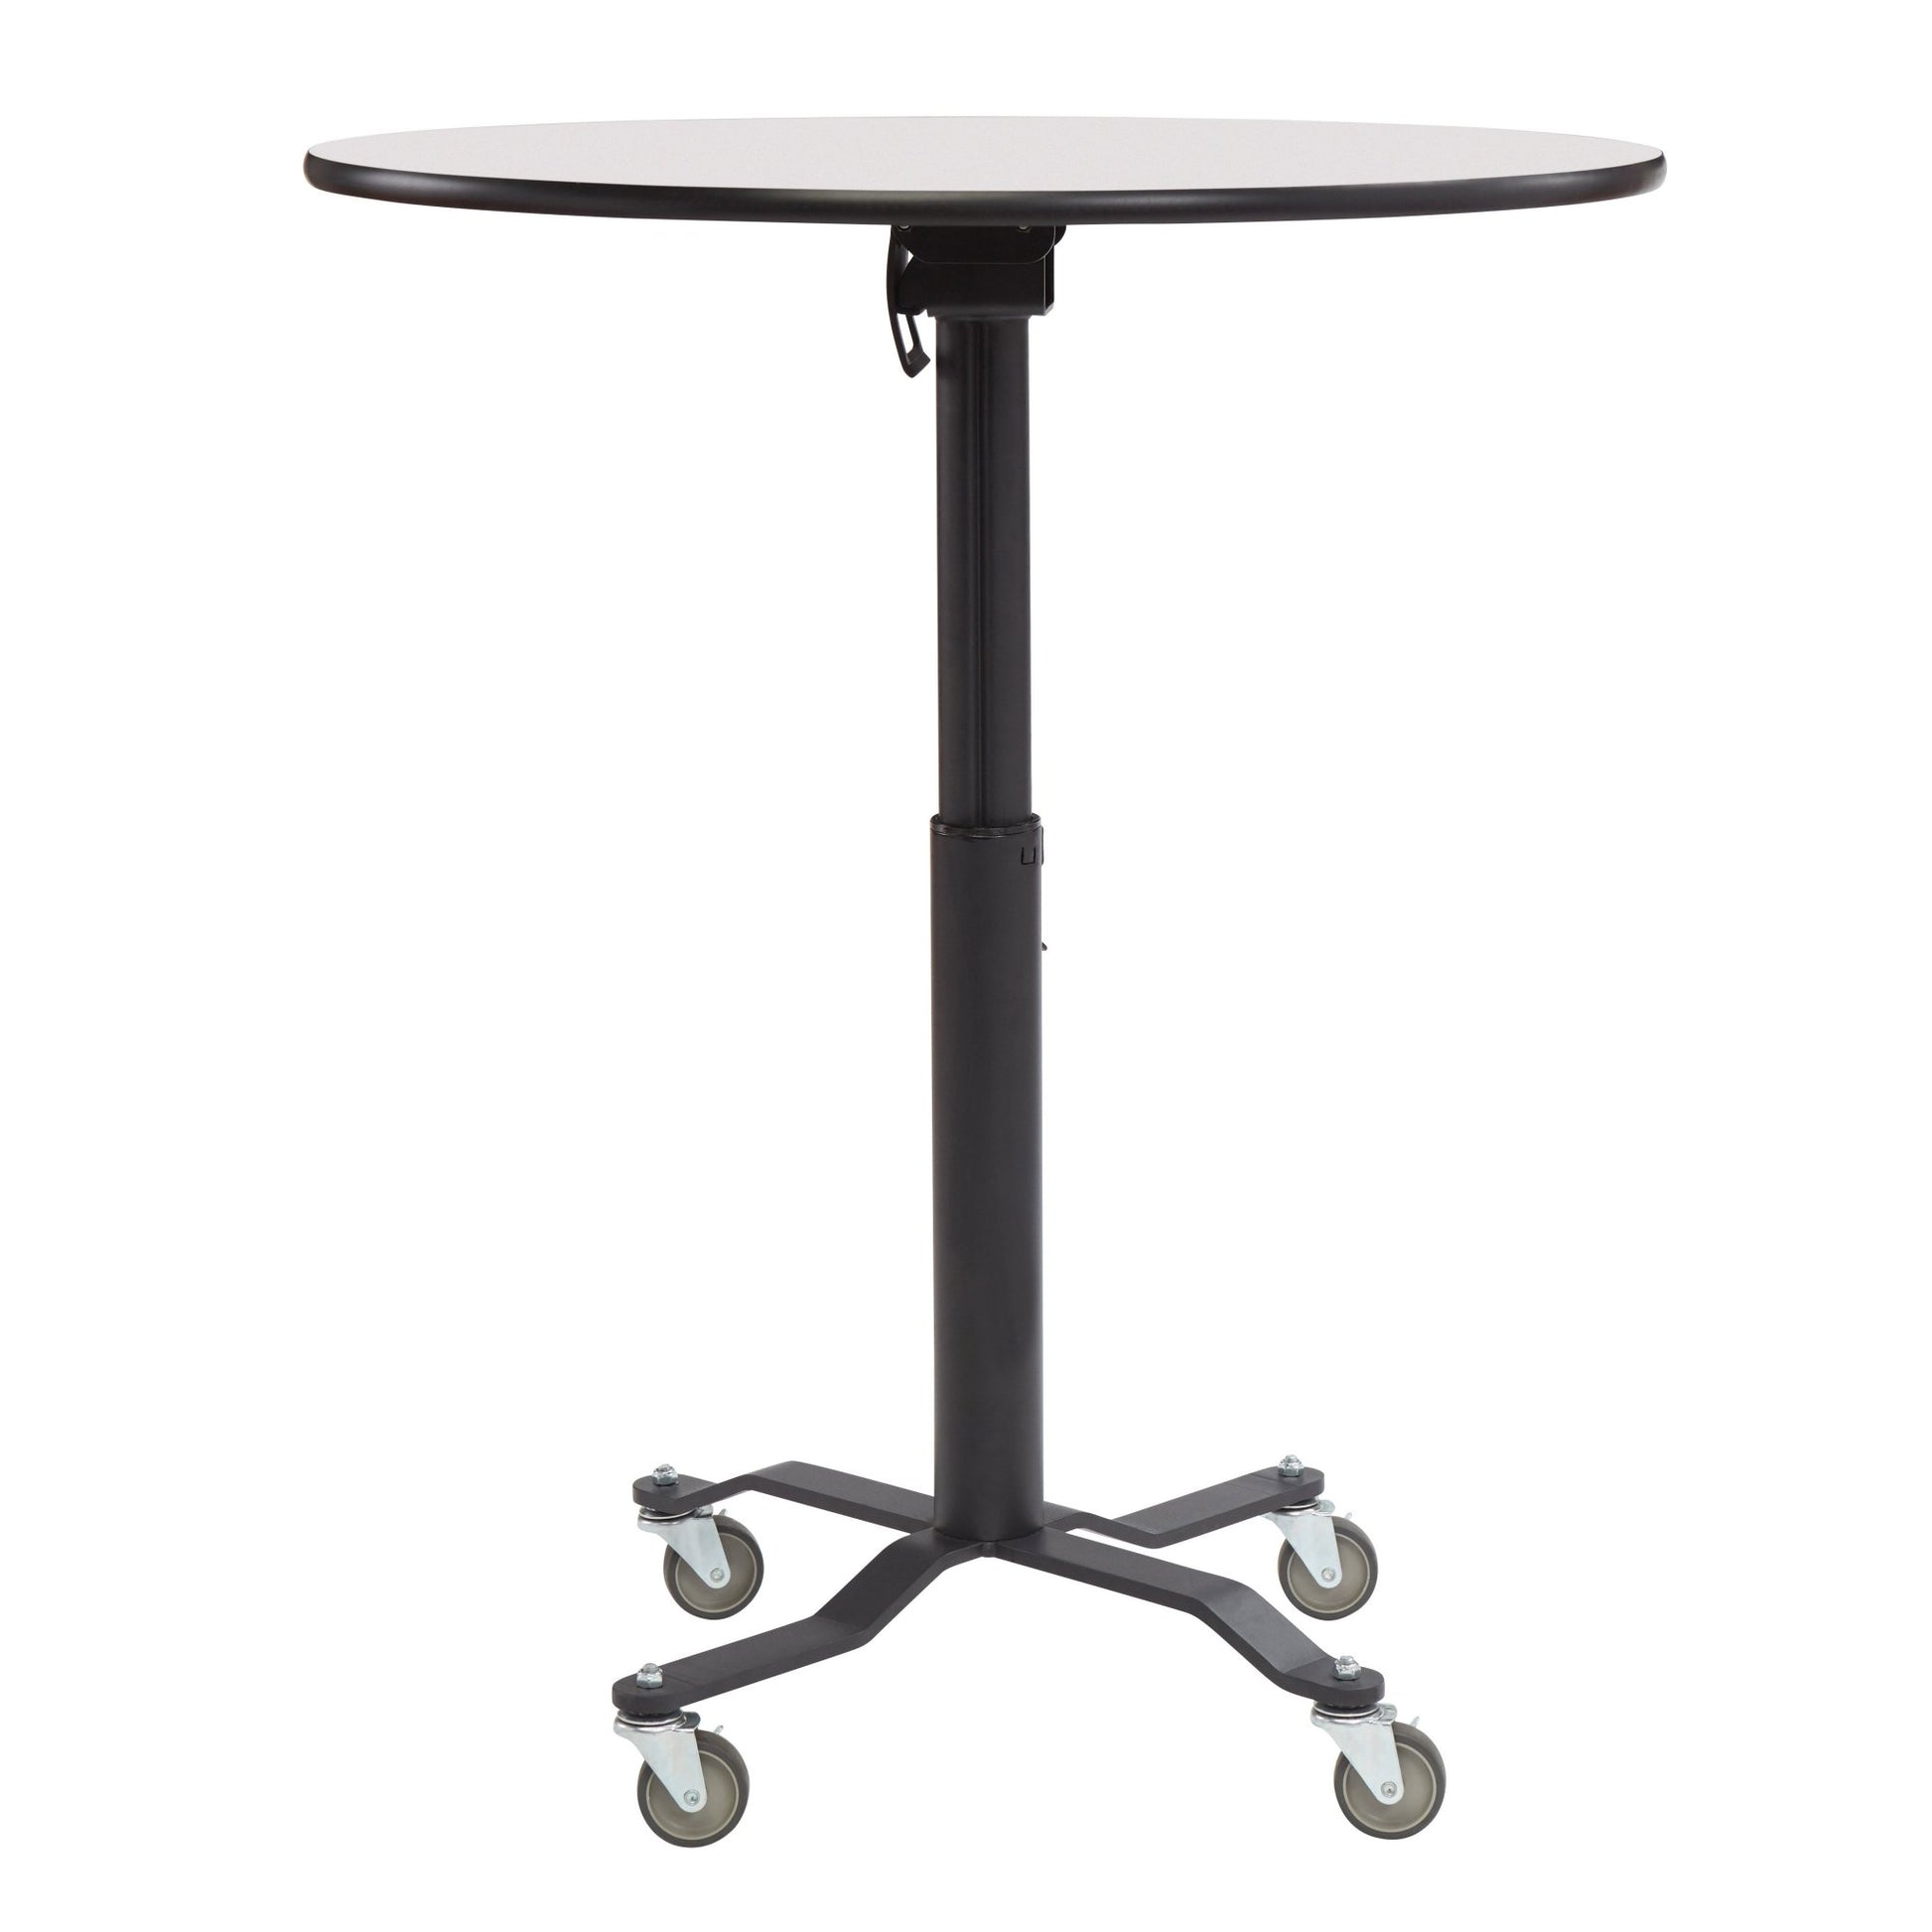 NPS Cafe Time II Table, 36" Round, Whiteboard Top, MDF Core, Protect Edge (NationalPublic Seating NPS-PCT136MDPEWB) - SchoolOutlet